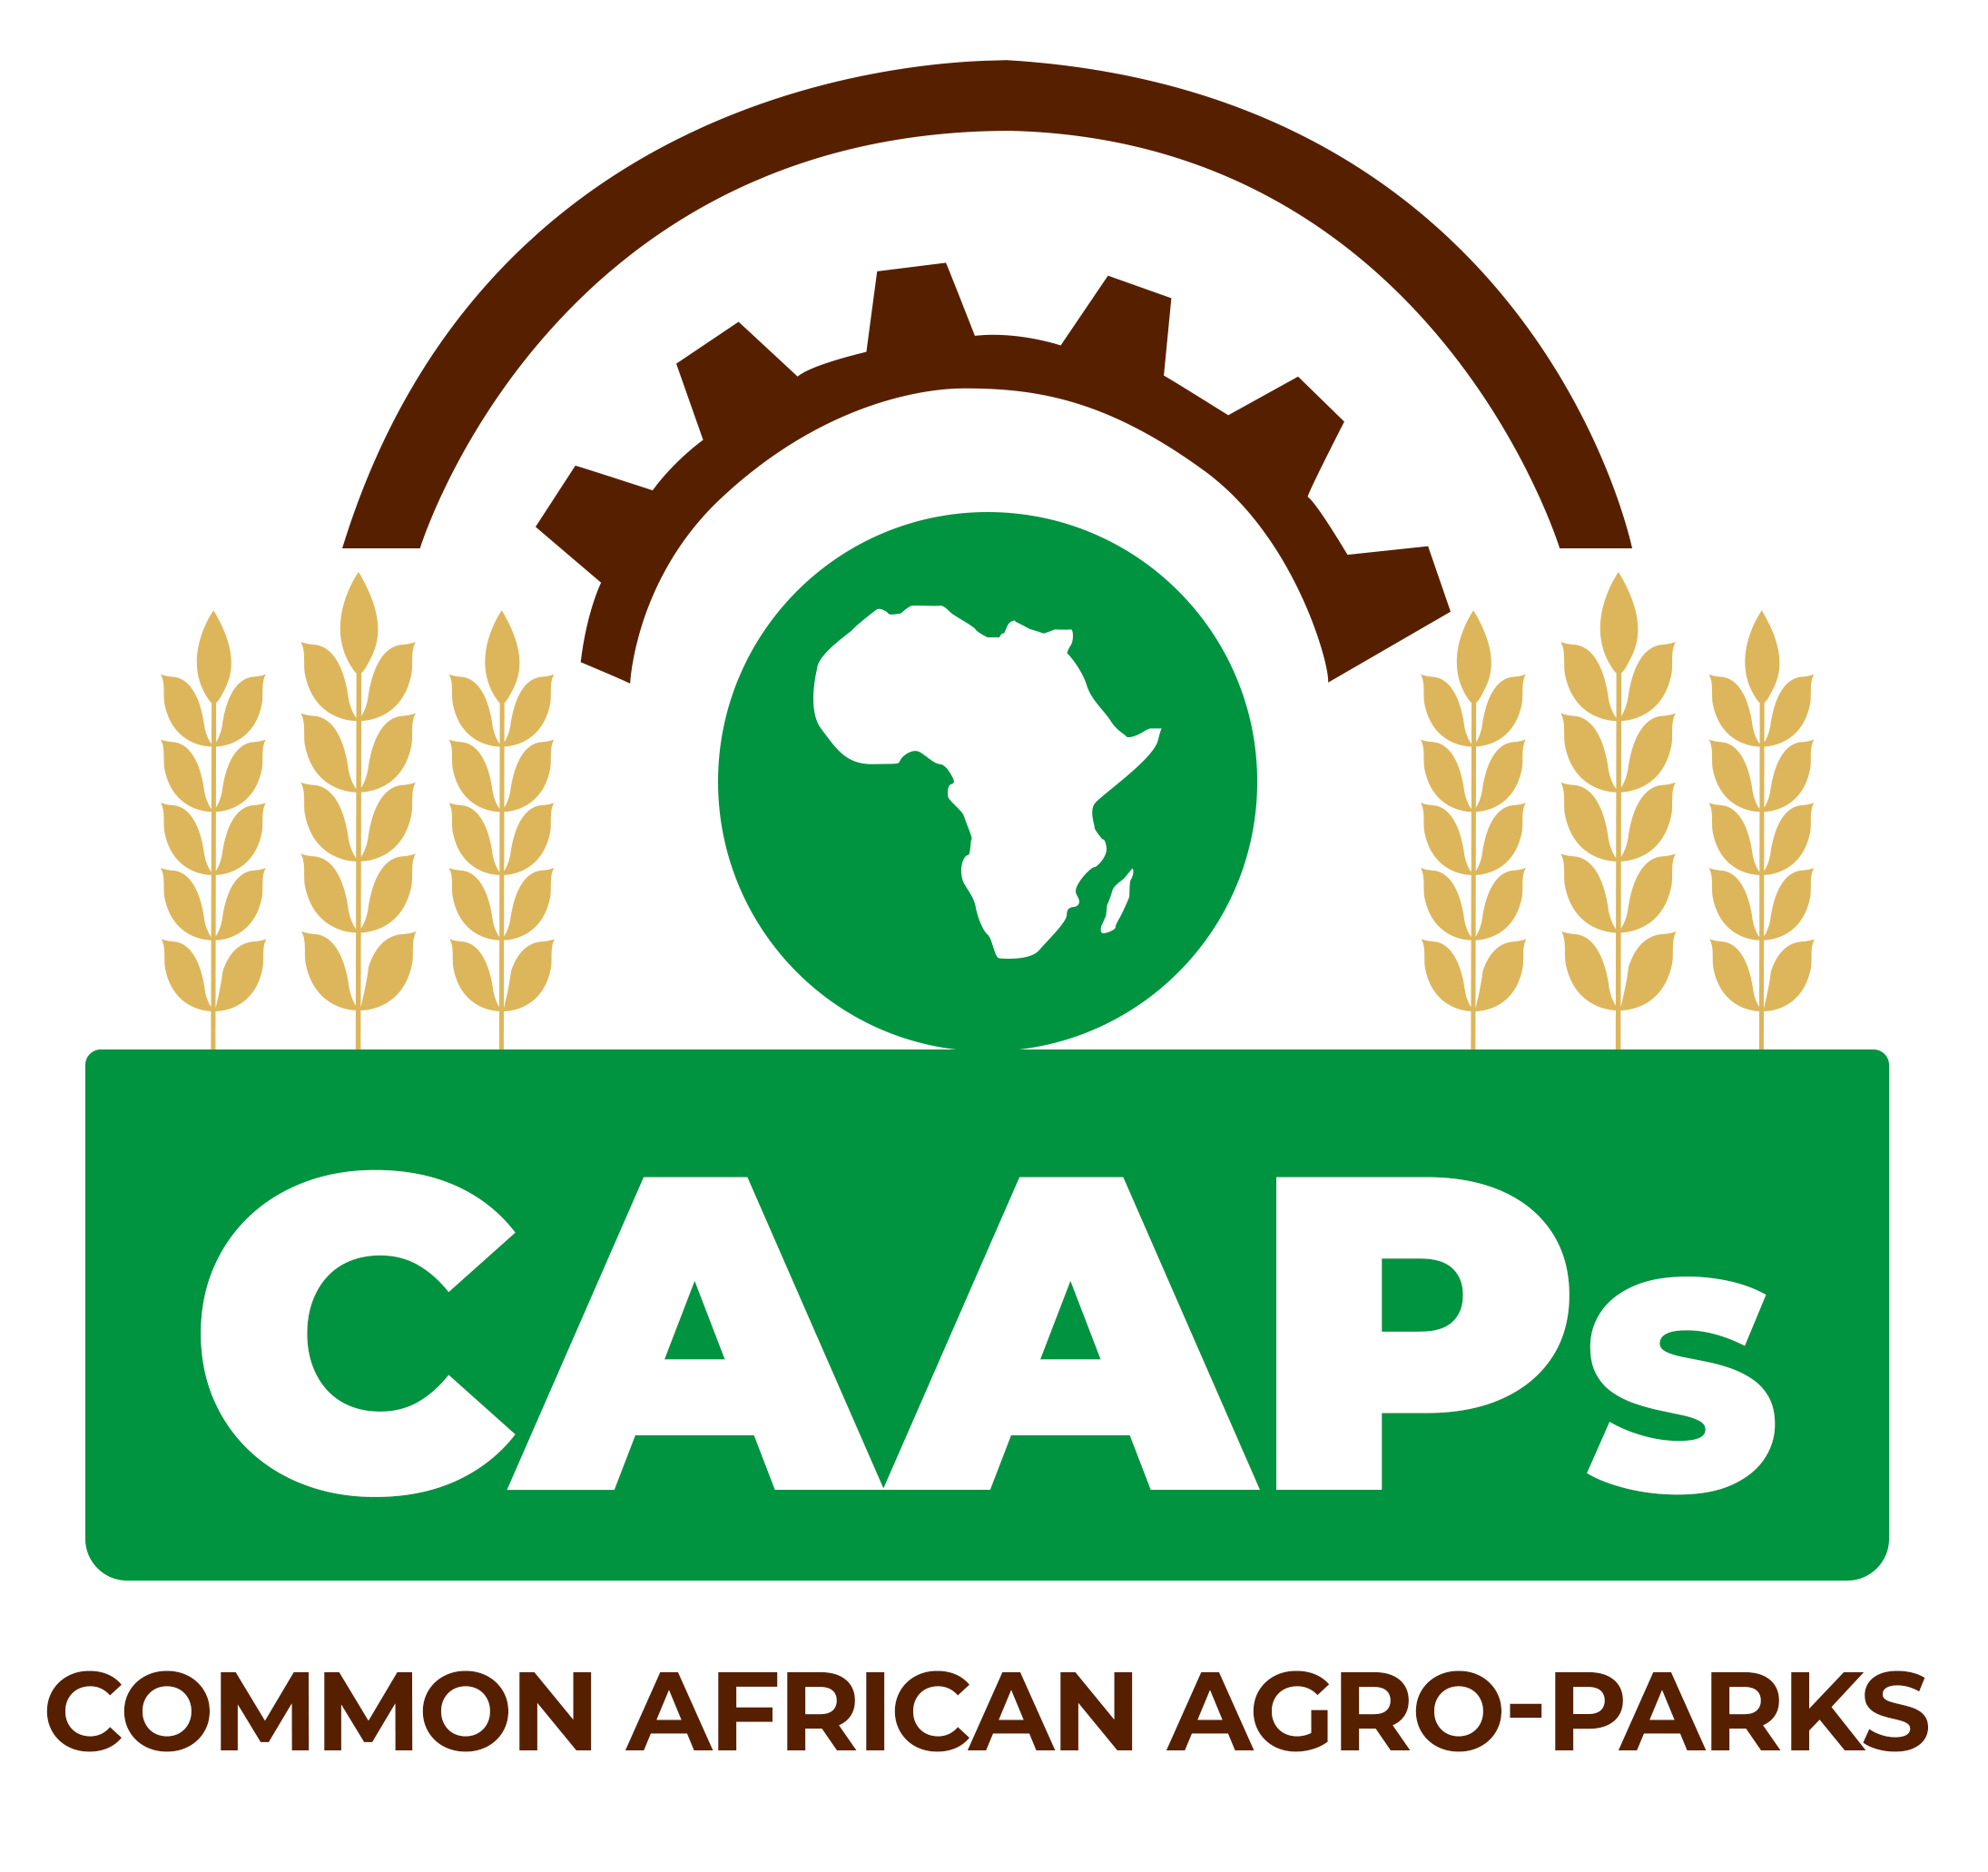 First regional meeting to drive Common African Agro-Parks vision